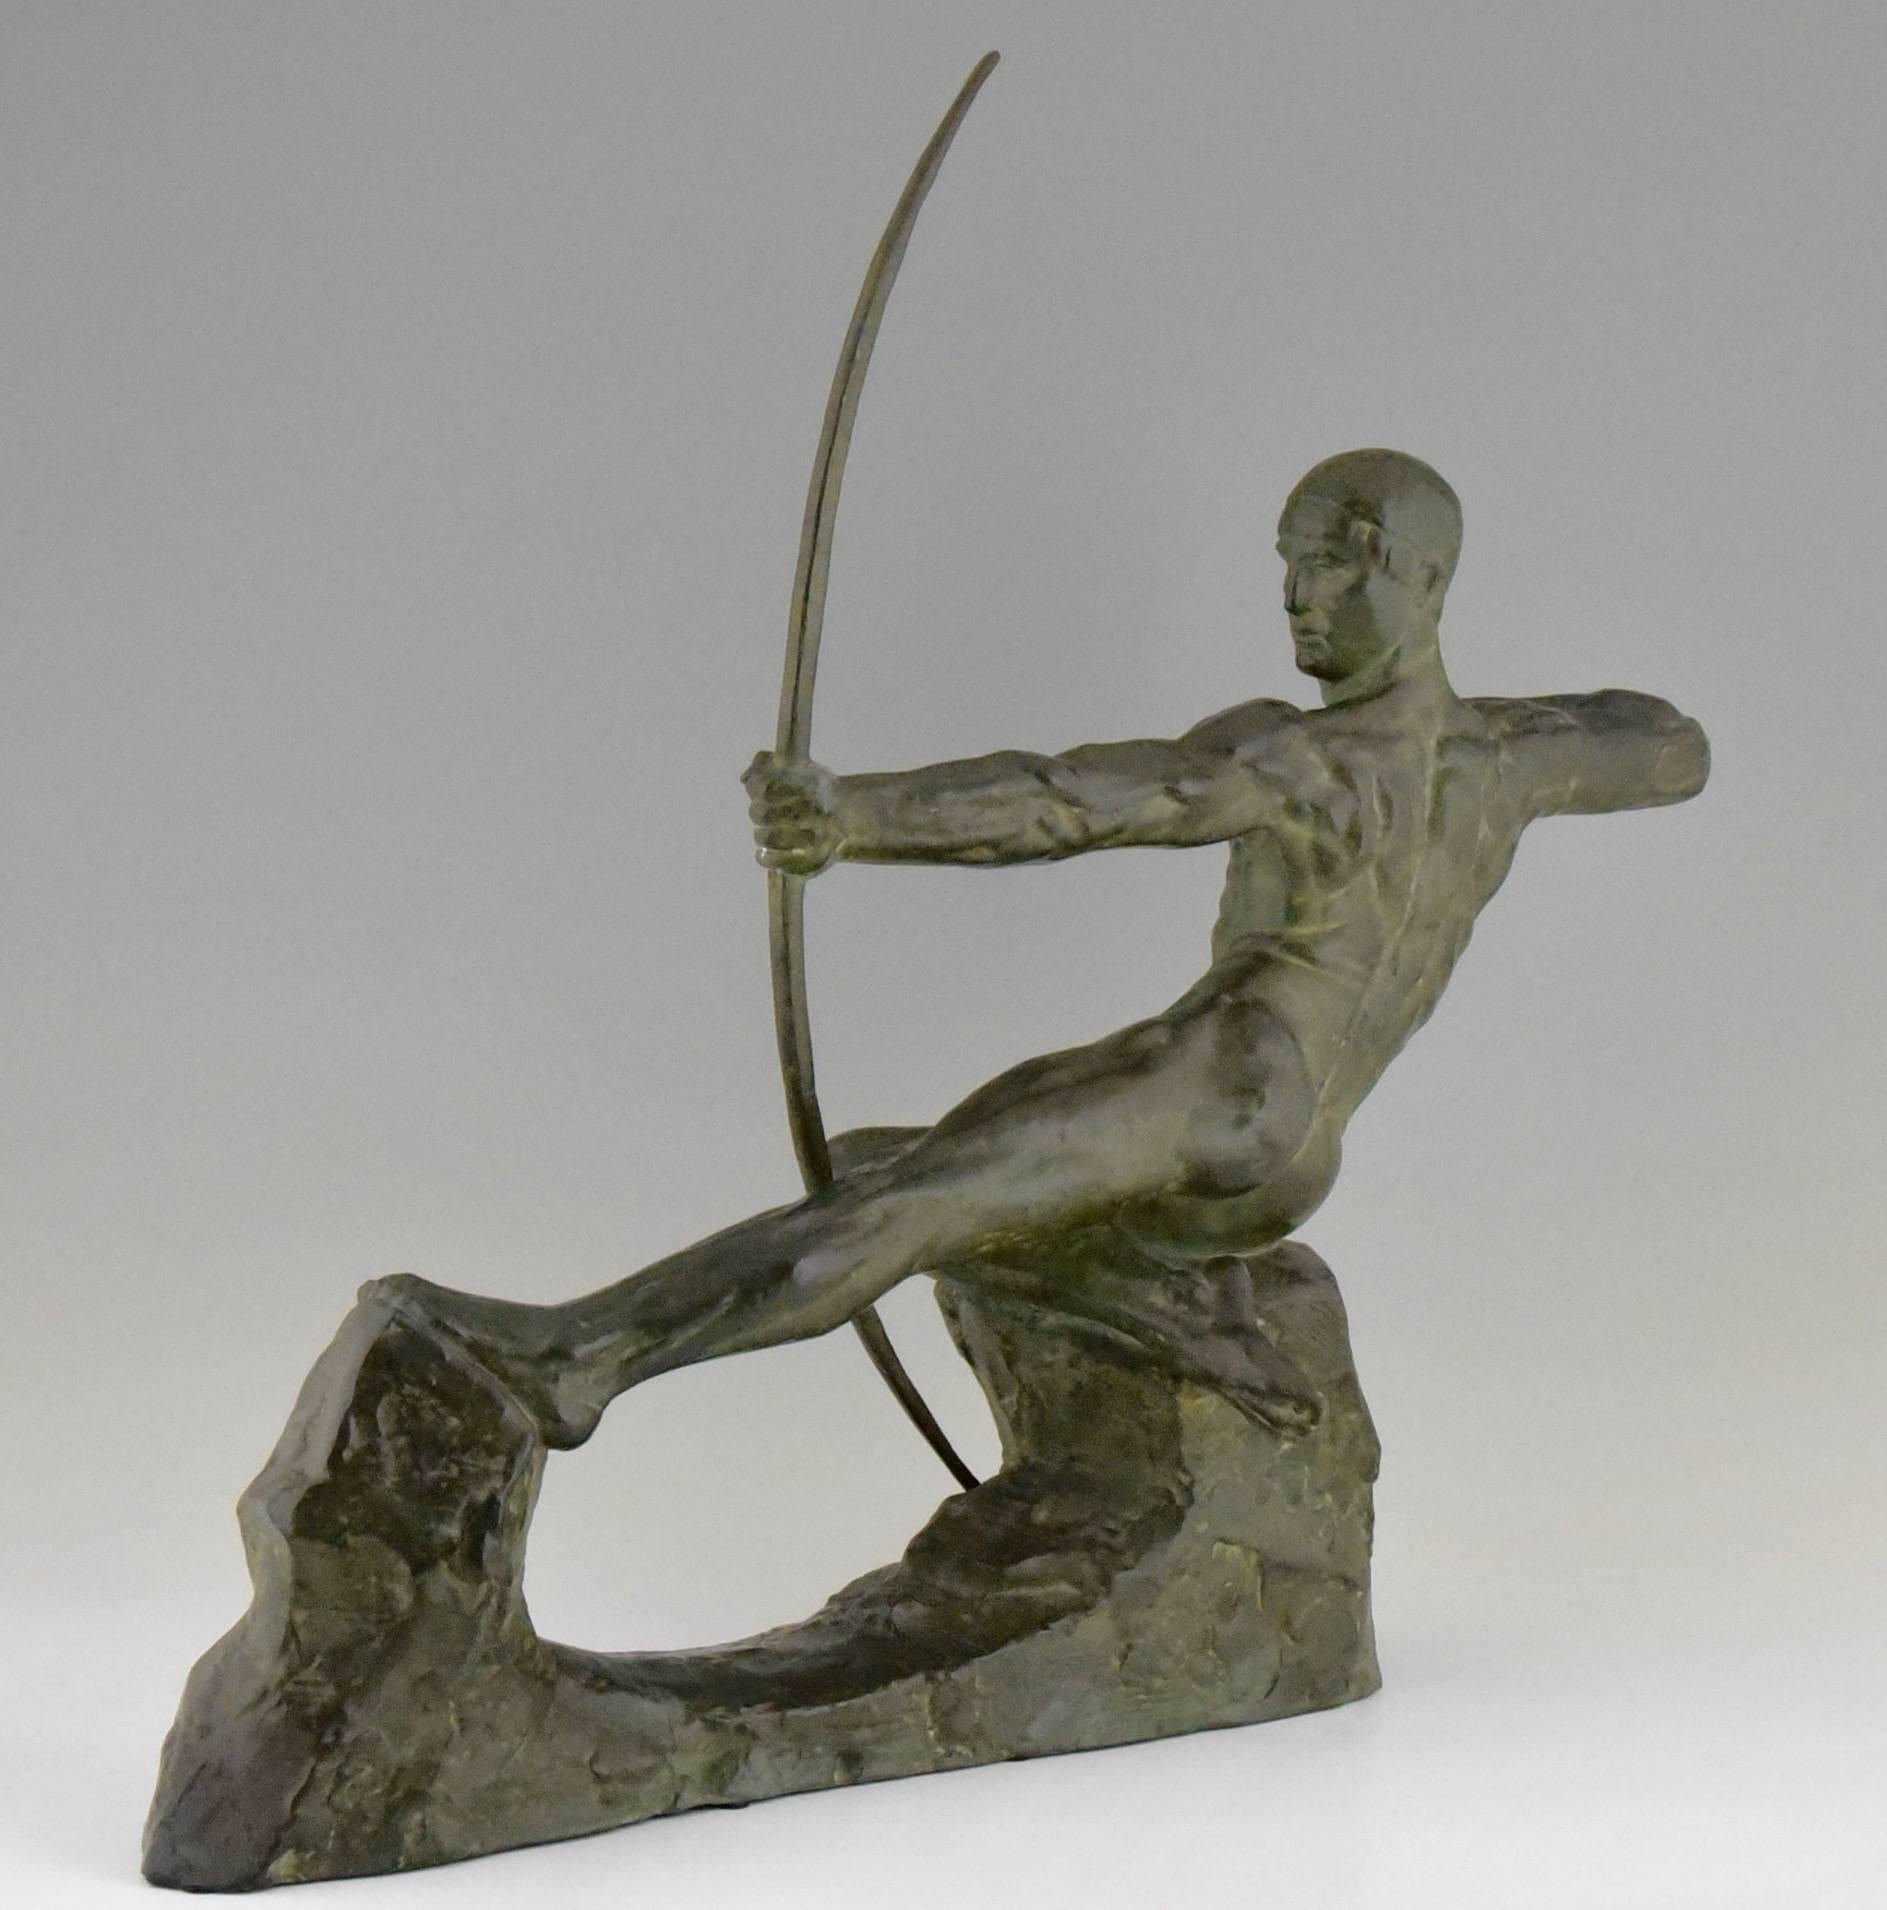 Belgian French Art Deco Bronze Sculpture of Male Nude Archer by Victor Demanet, 1930